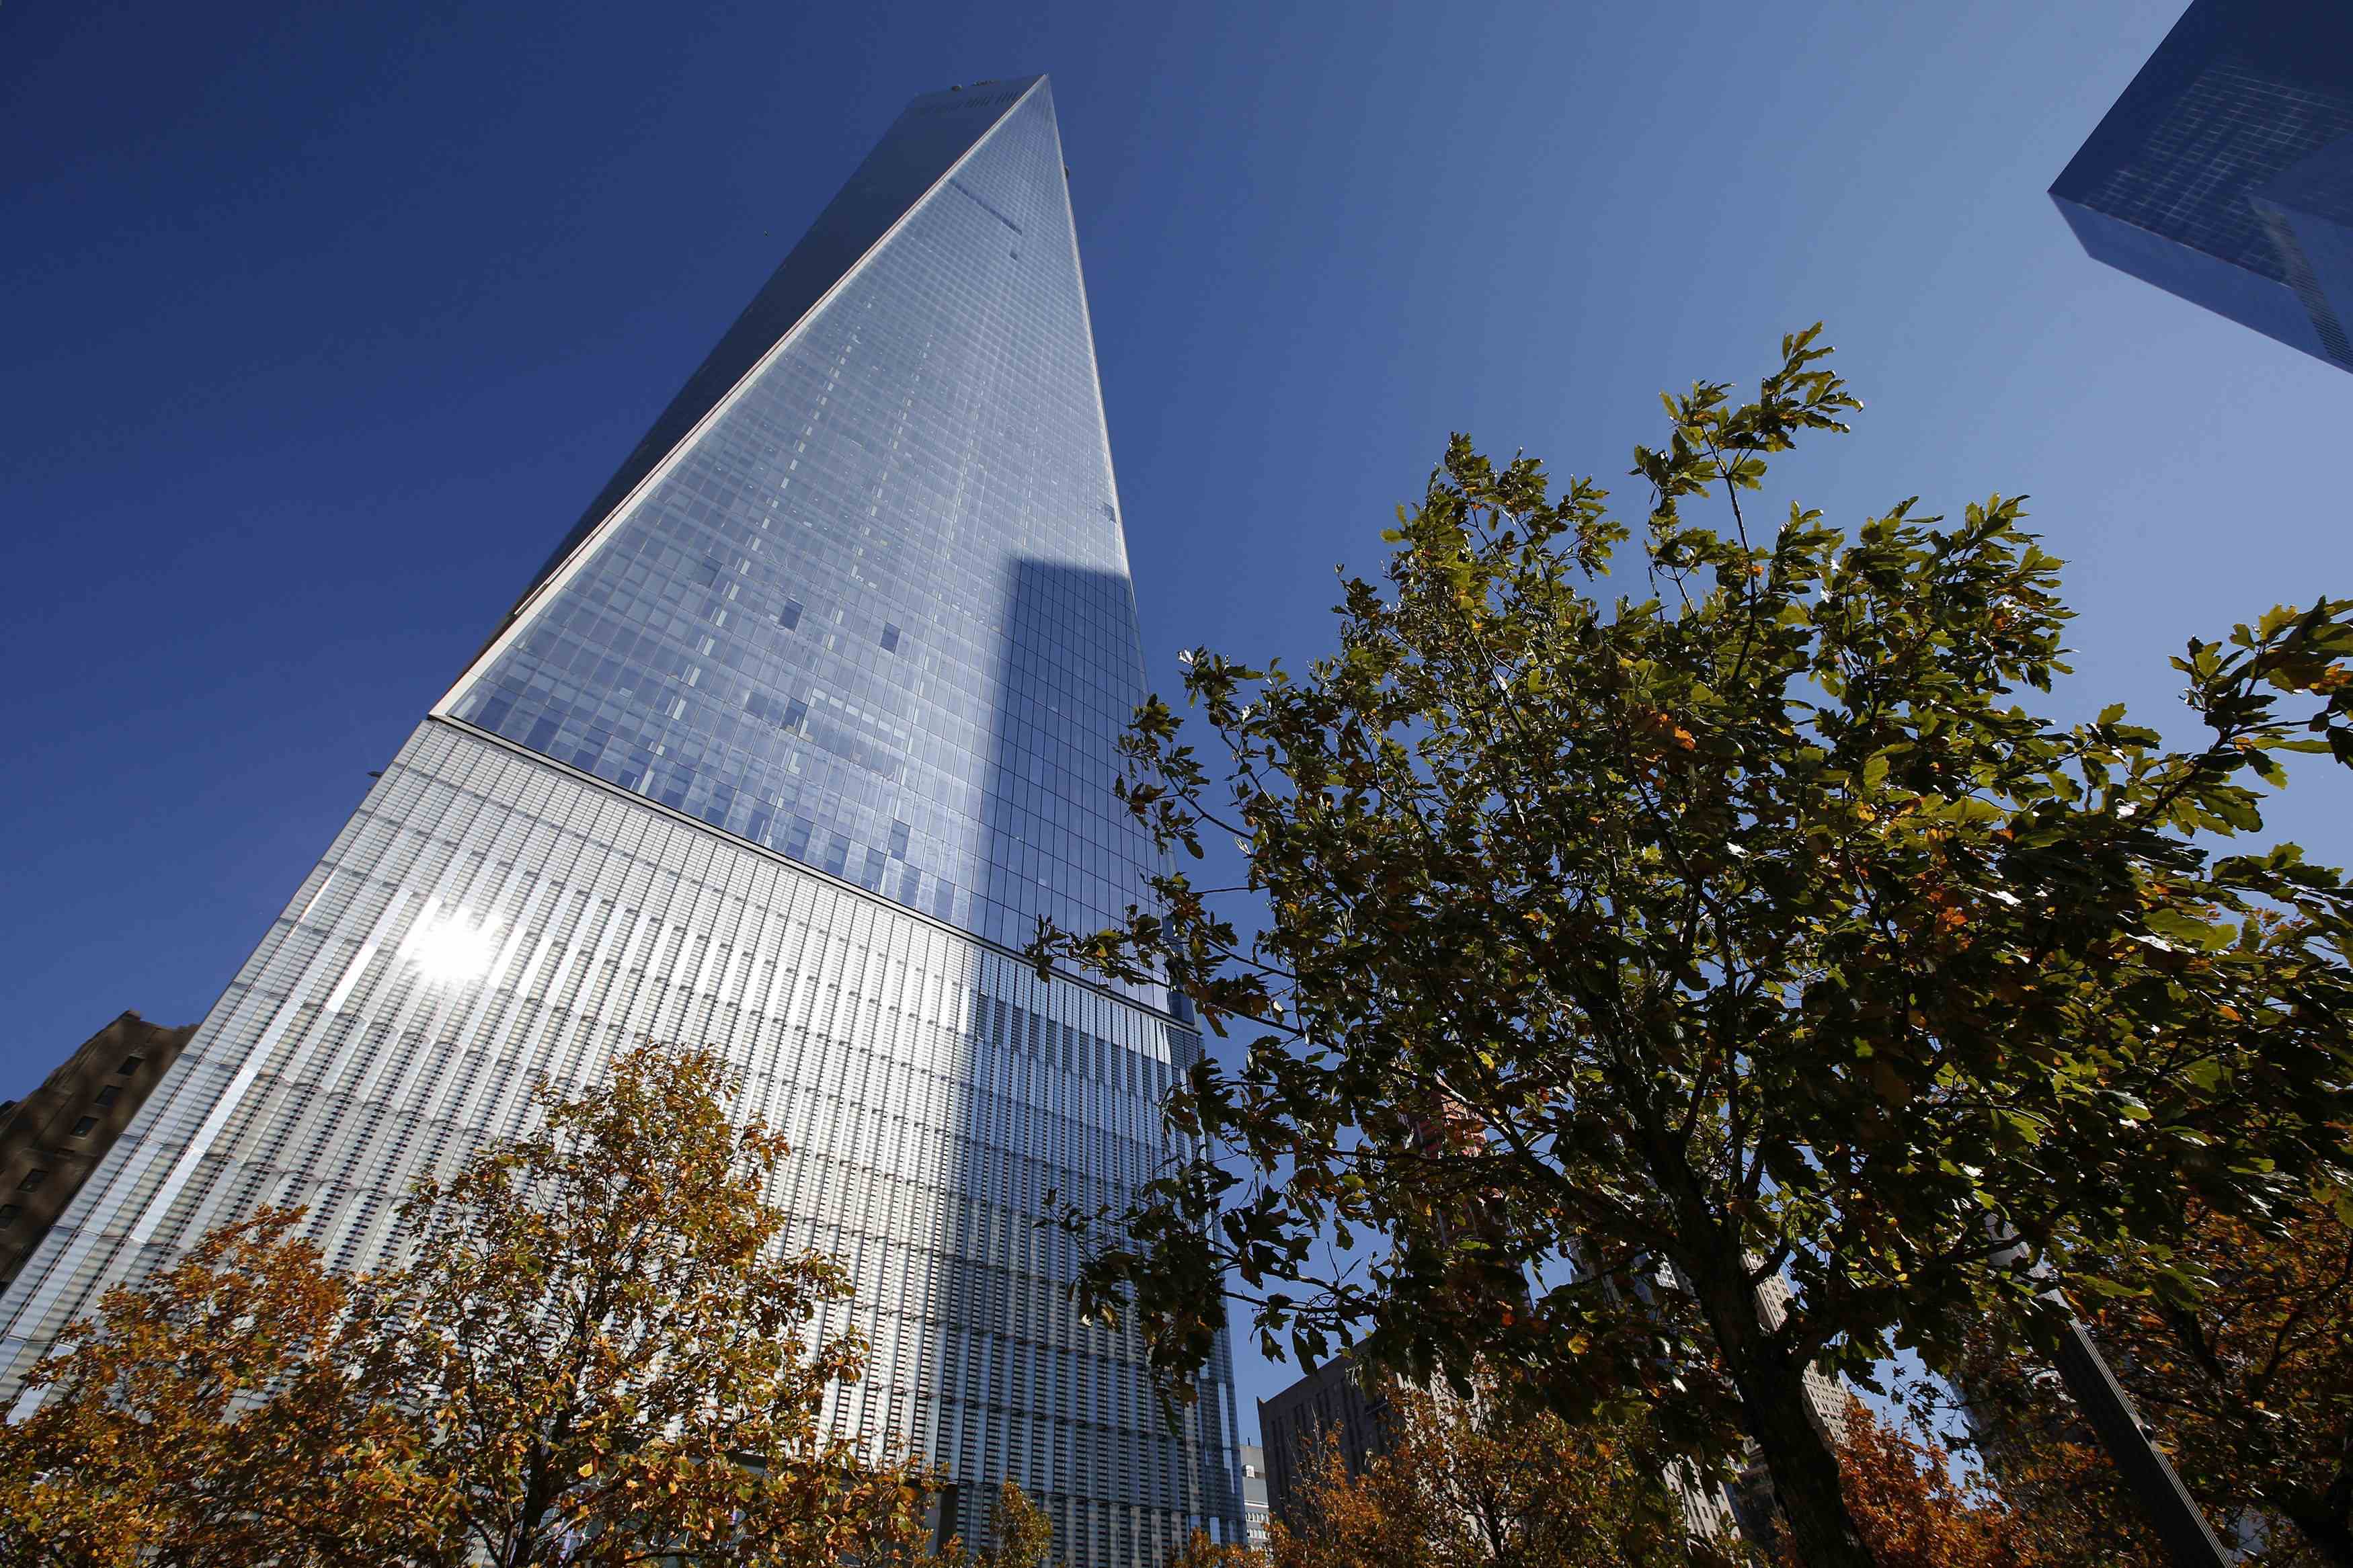 A street level view of the One World Trade Center tower in New York, November 3, 2014.